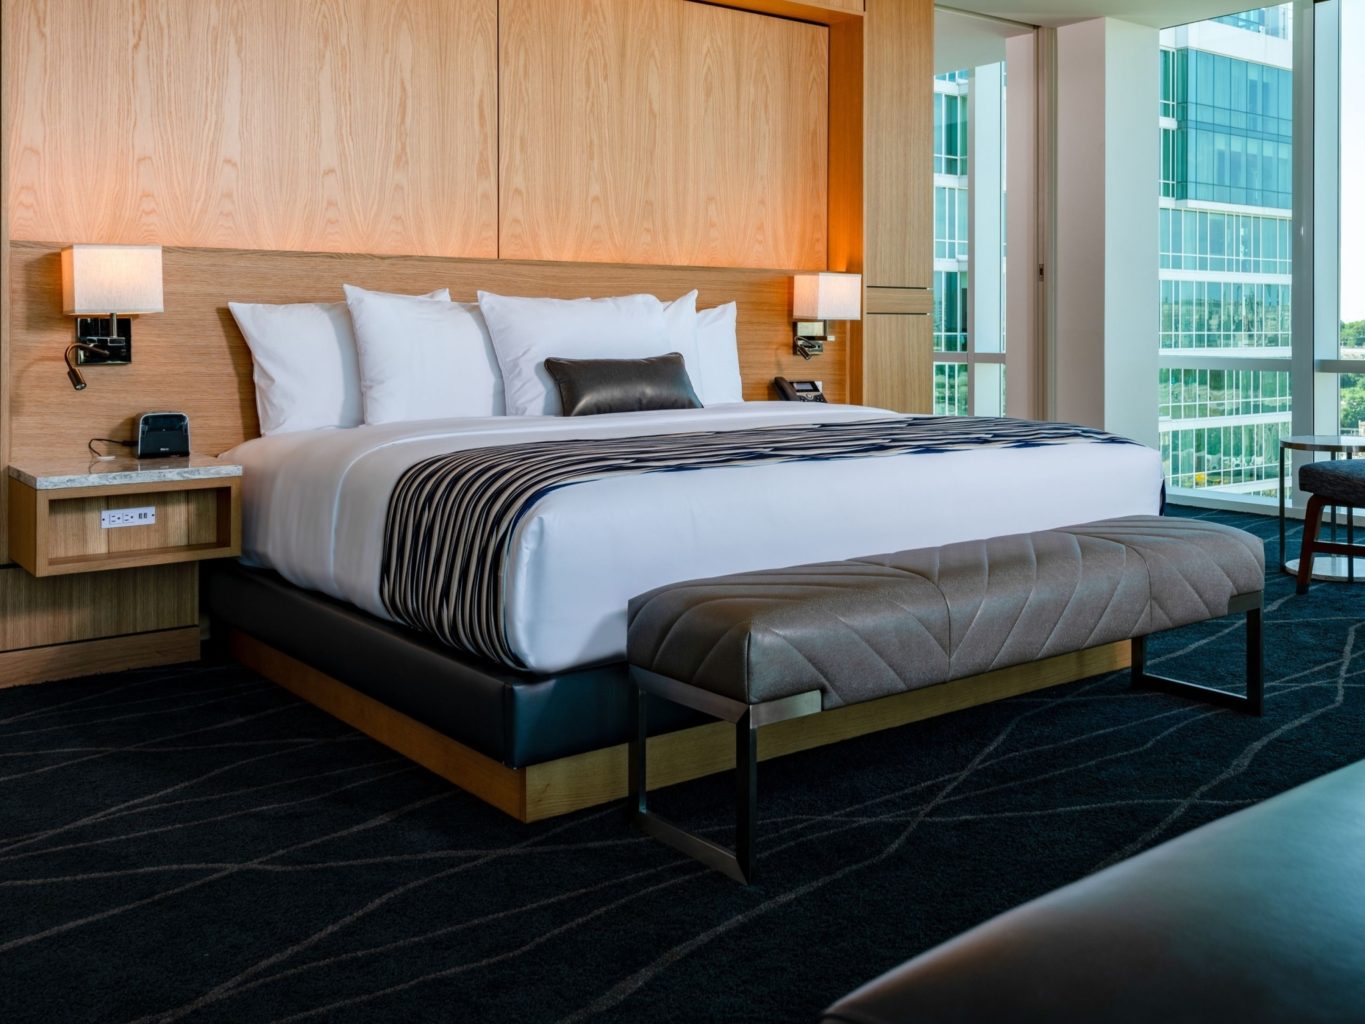 Potawatomi Hotel & Casino Selects INTELITY for Complete Mobile Guest Experience Header Image